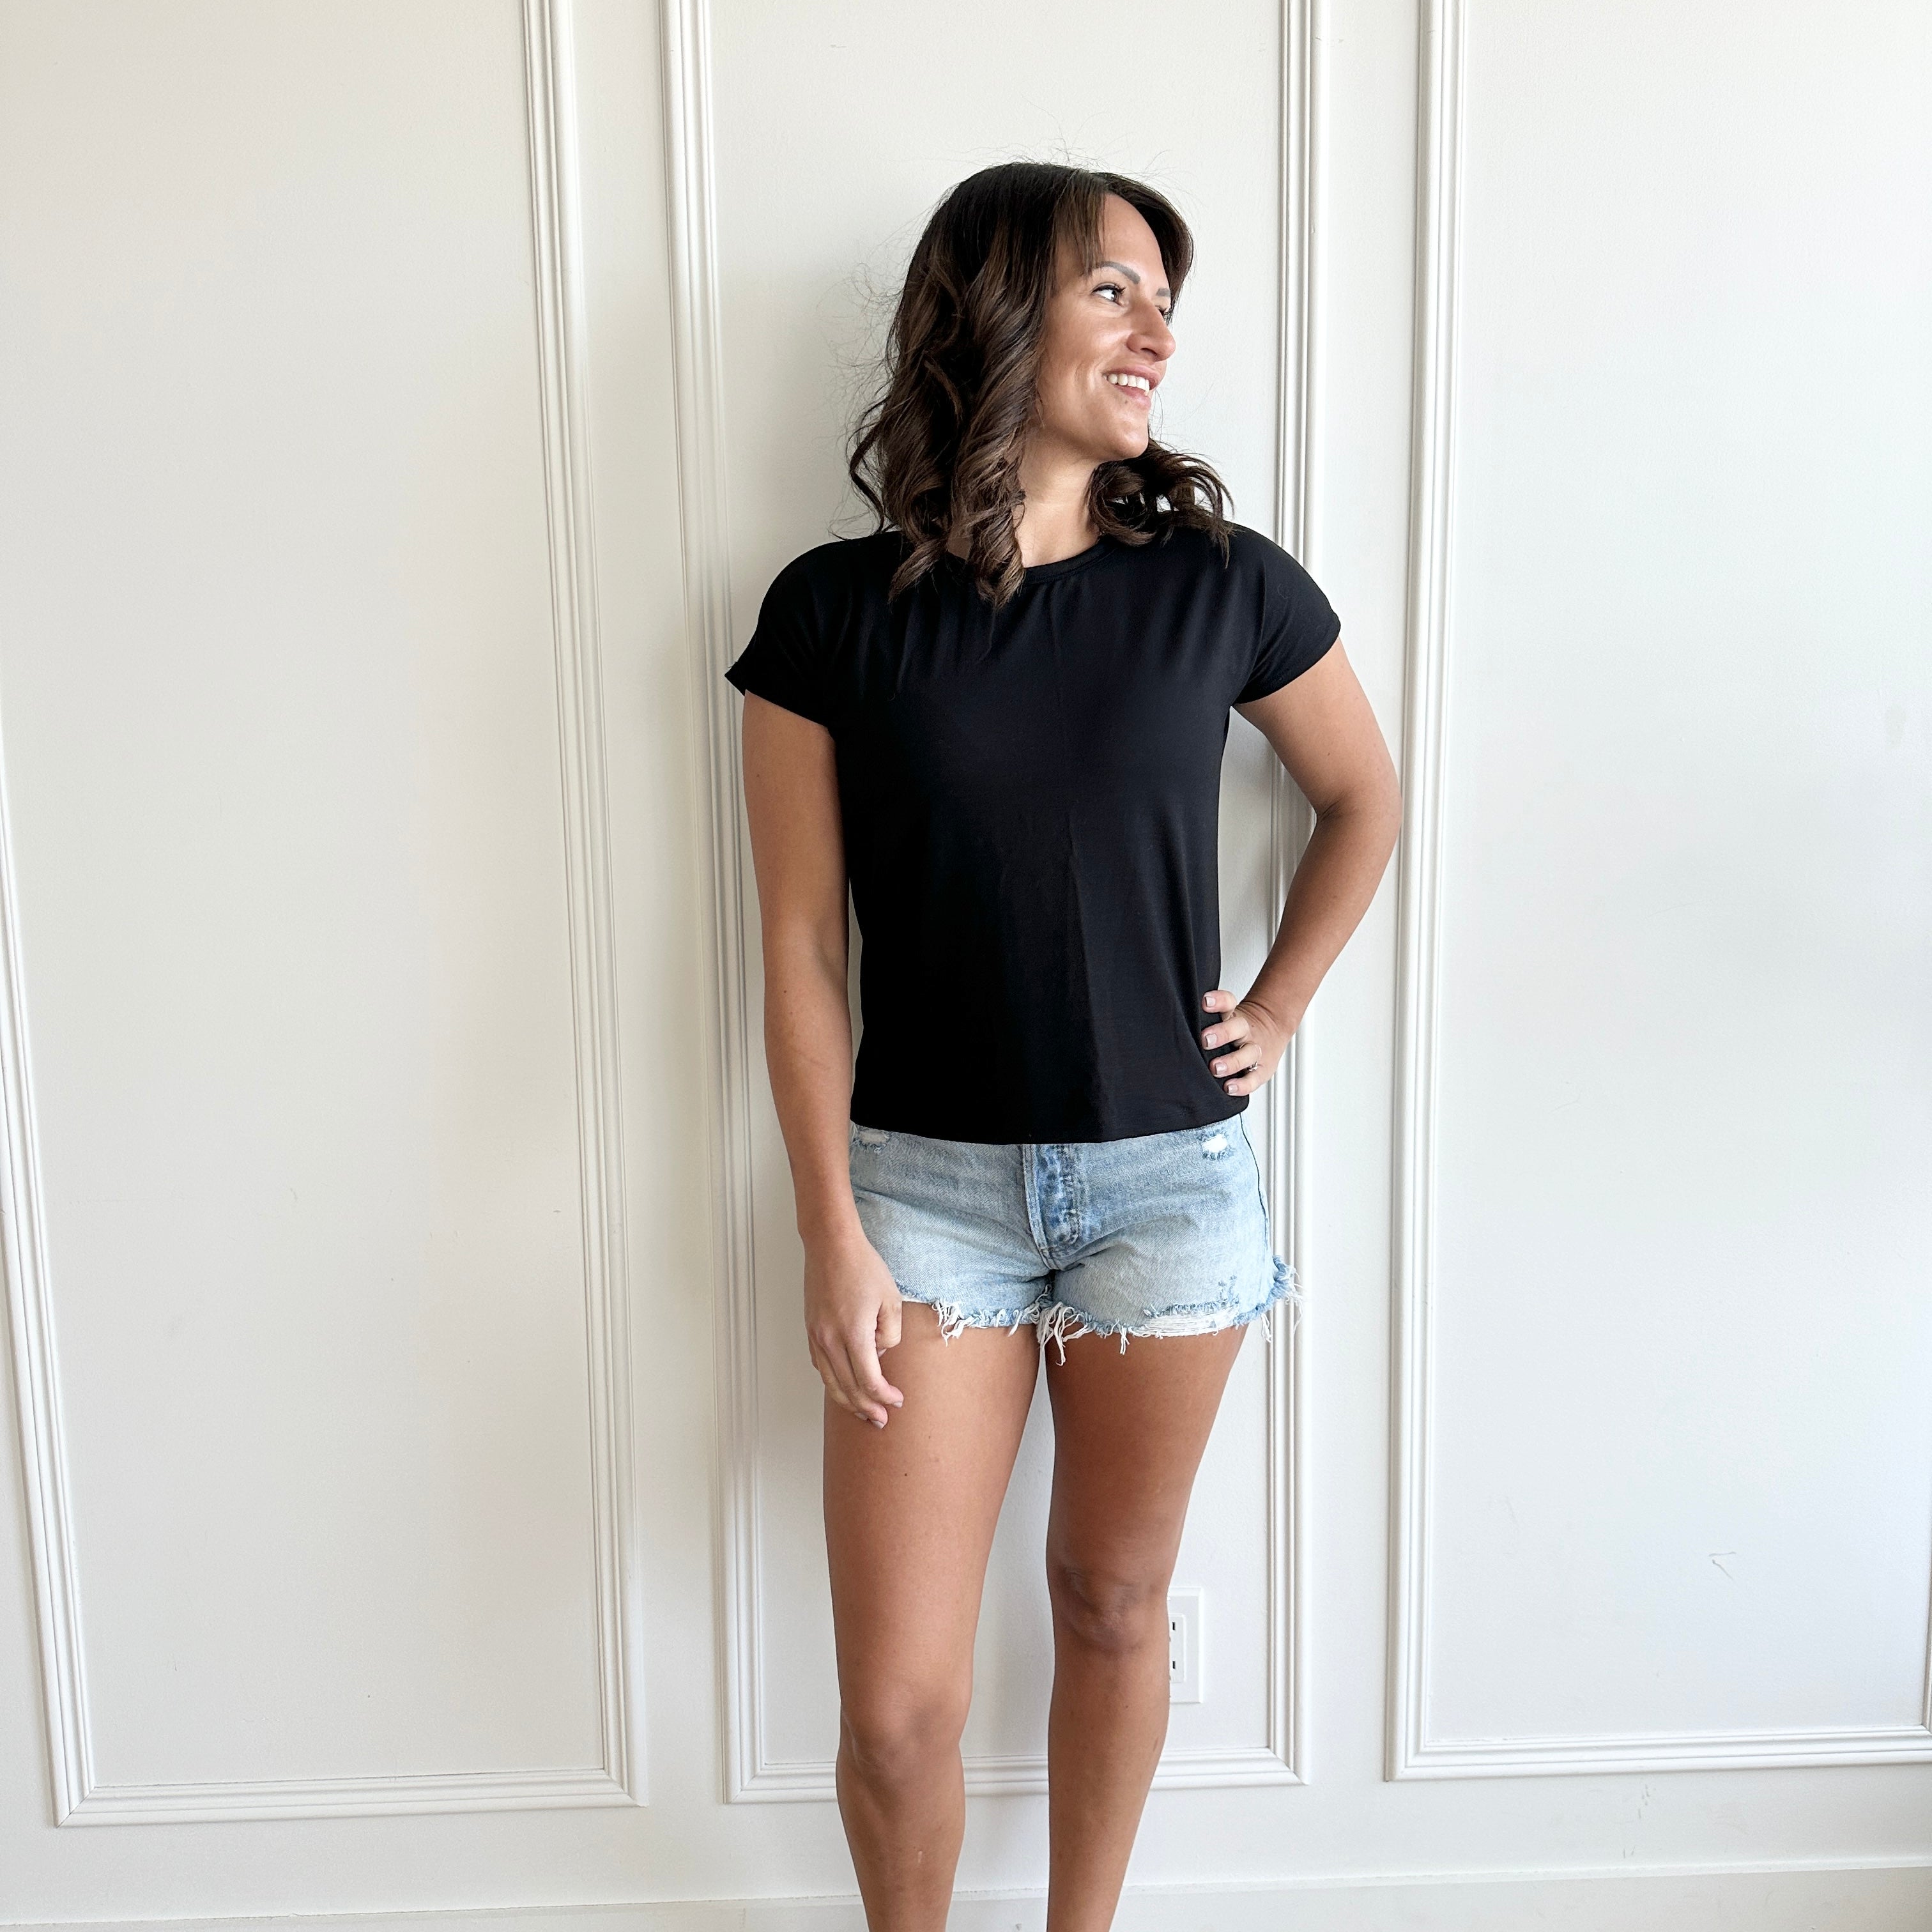 white woman standing against  a white wall wearing a black t-shirt and jean shorts